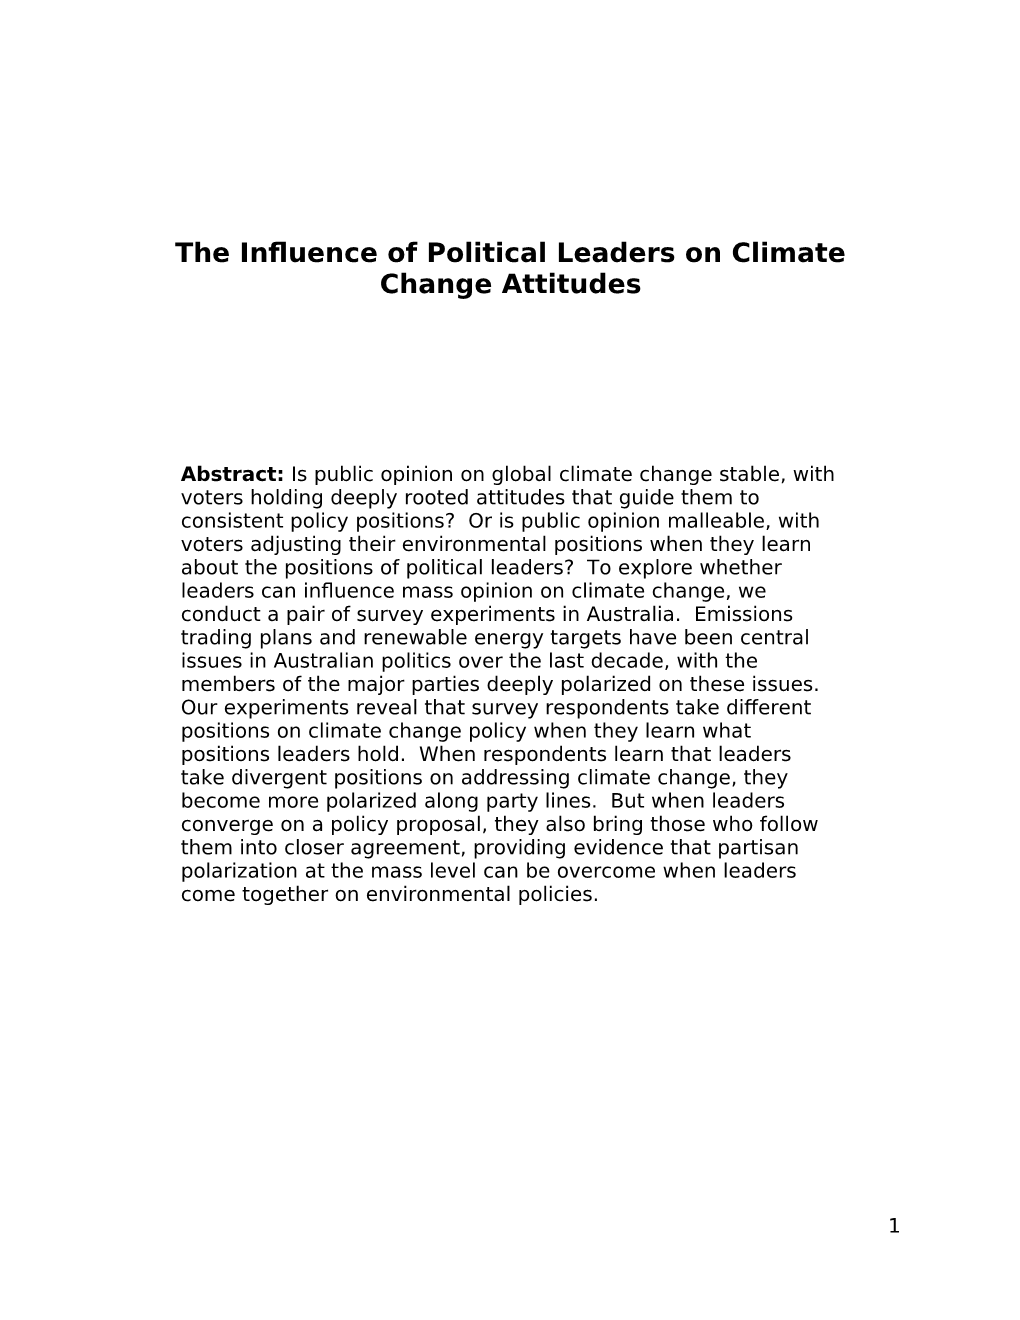 The Influence of Political Leaders on Climate Change Attitudes